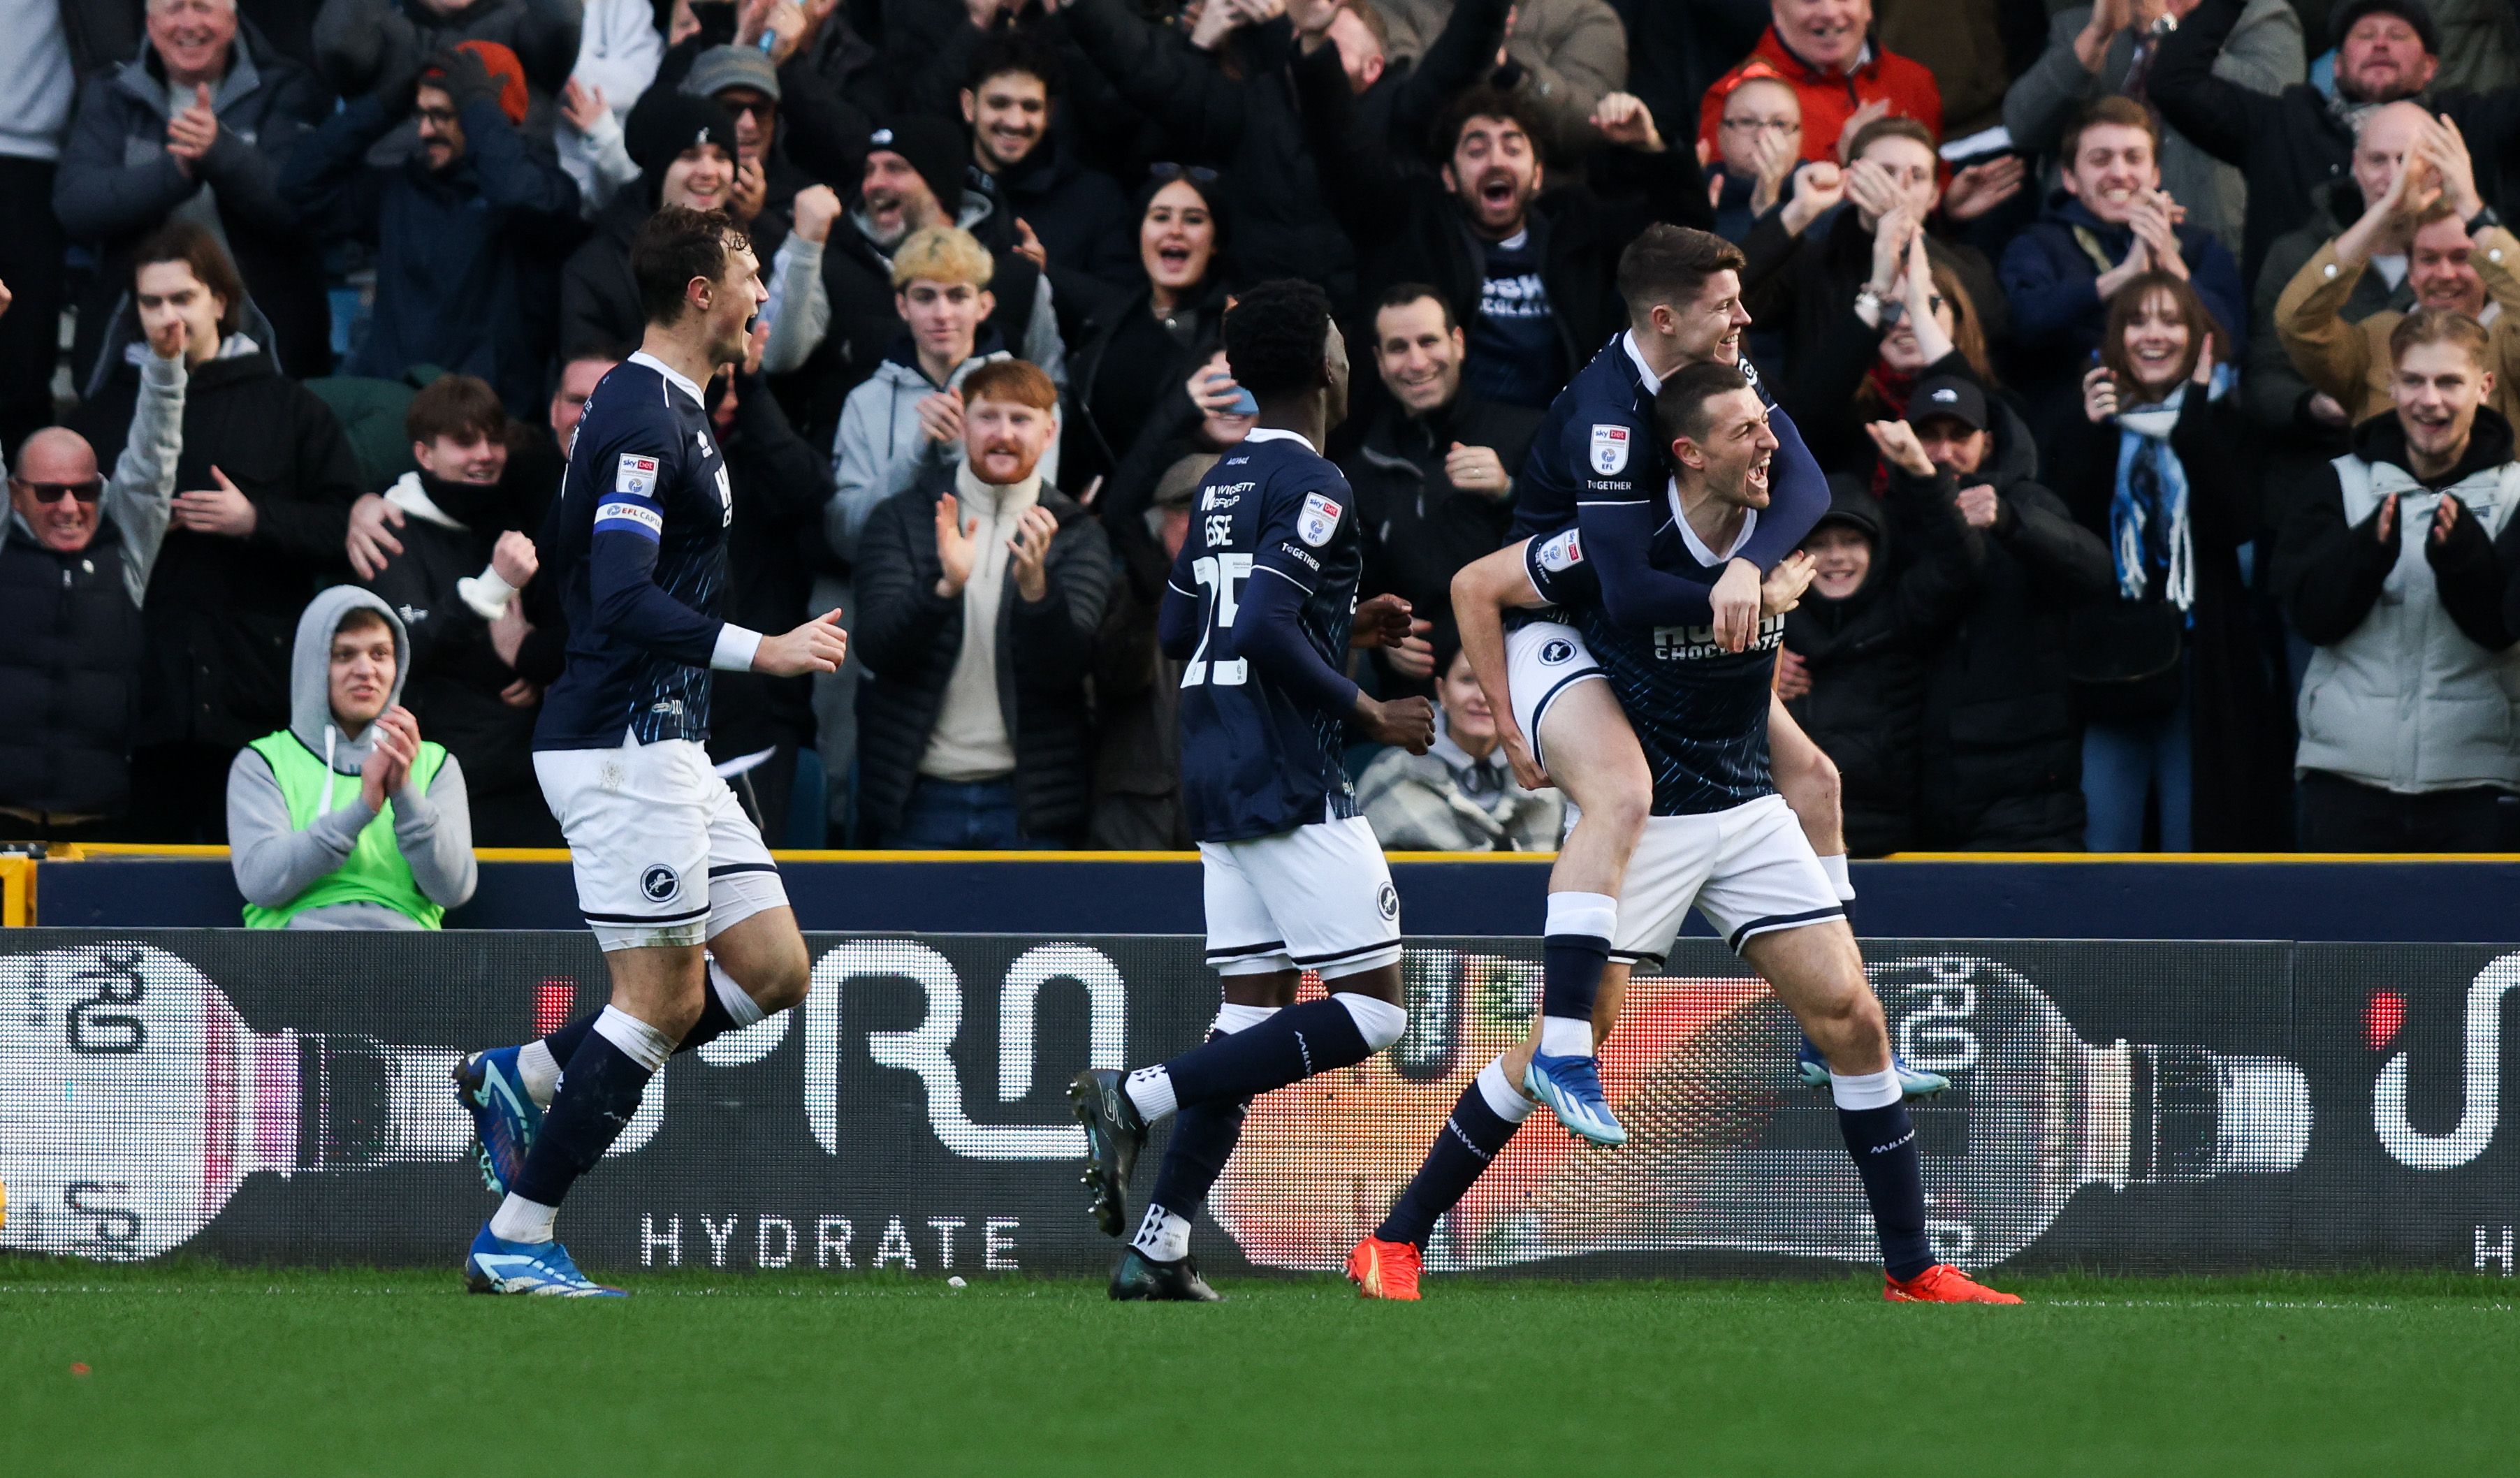 Millwall players celebrate a goal in front of their own celebrating fans